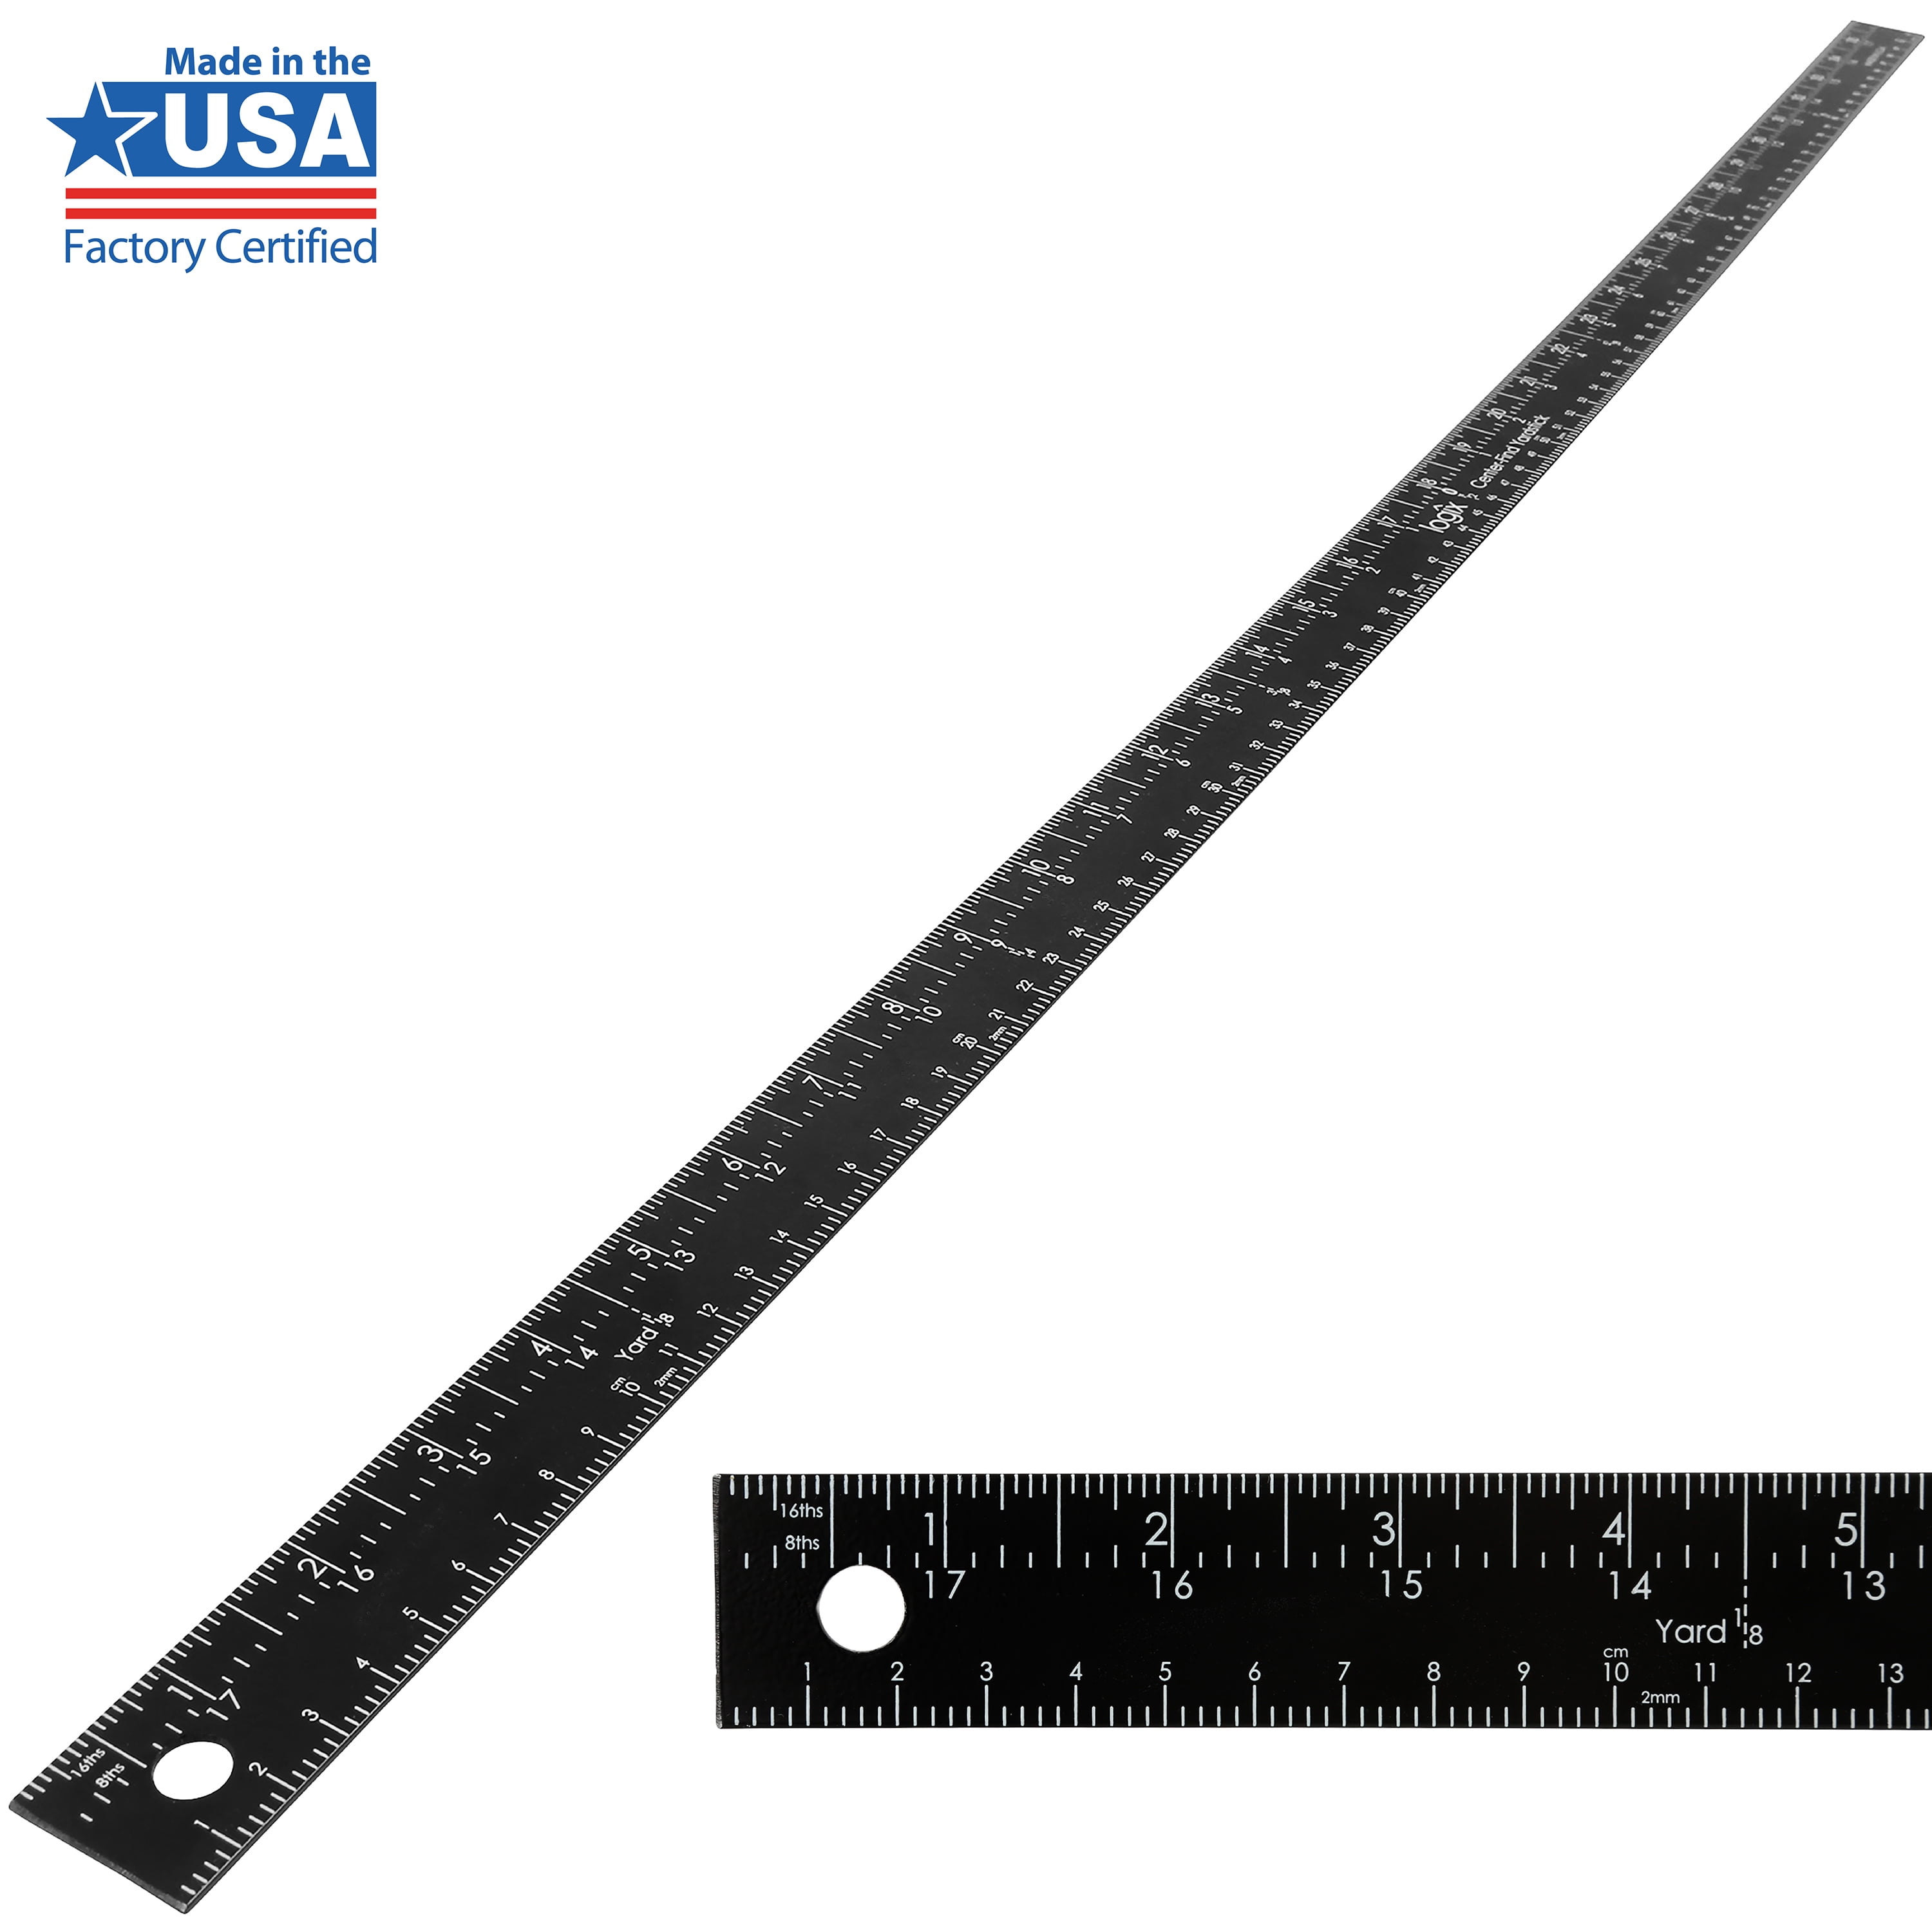 Heavy Duty Metal Yardstick 36x1 MADE IN USA Black Aluminum Ruler FREE  SHIPPING